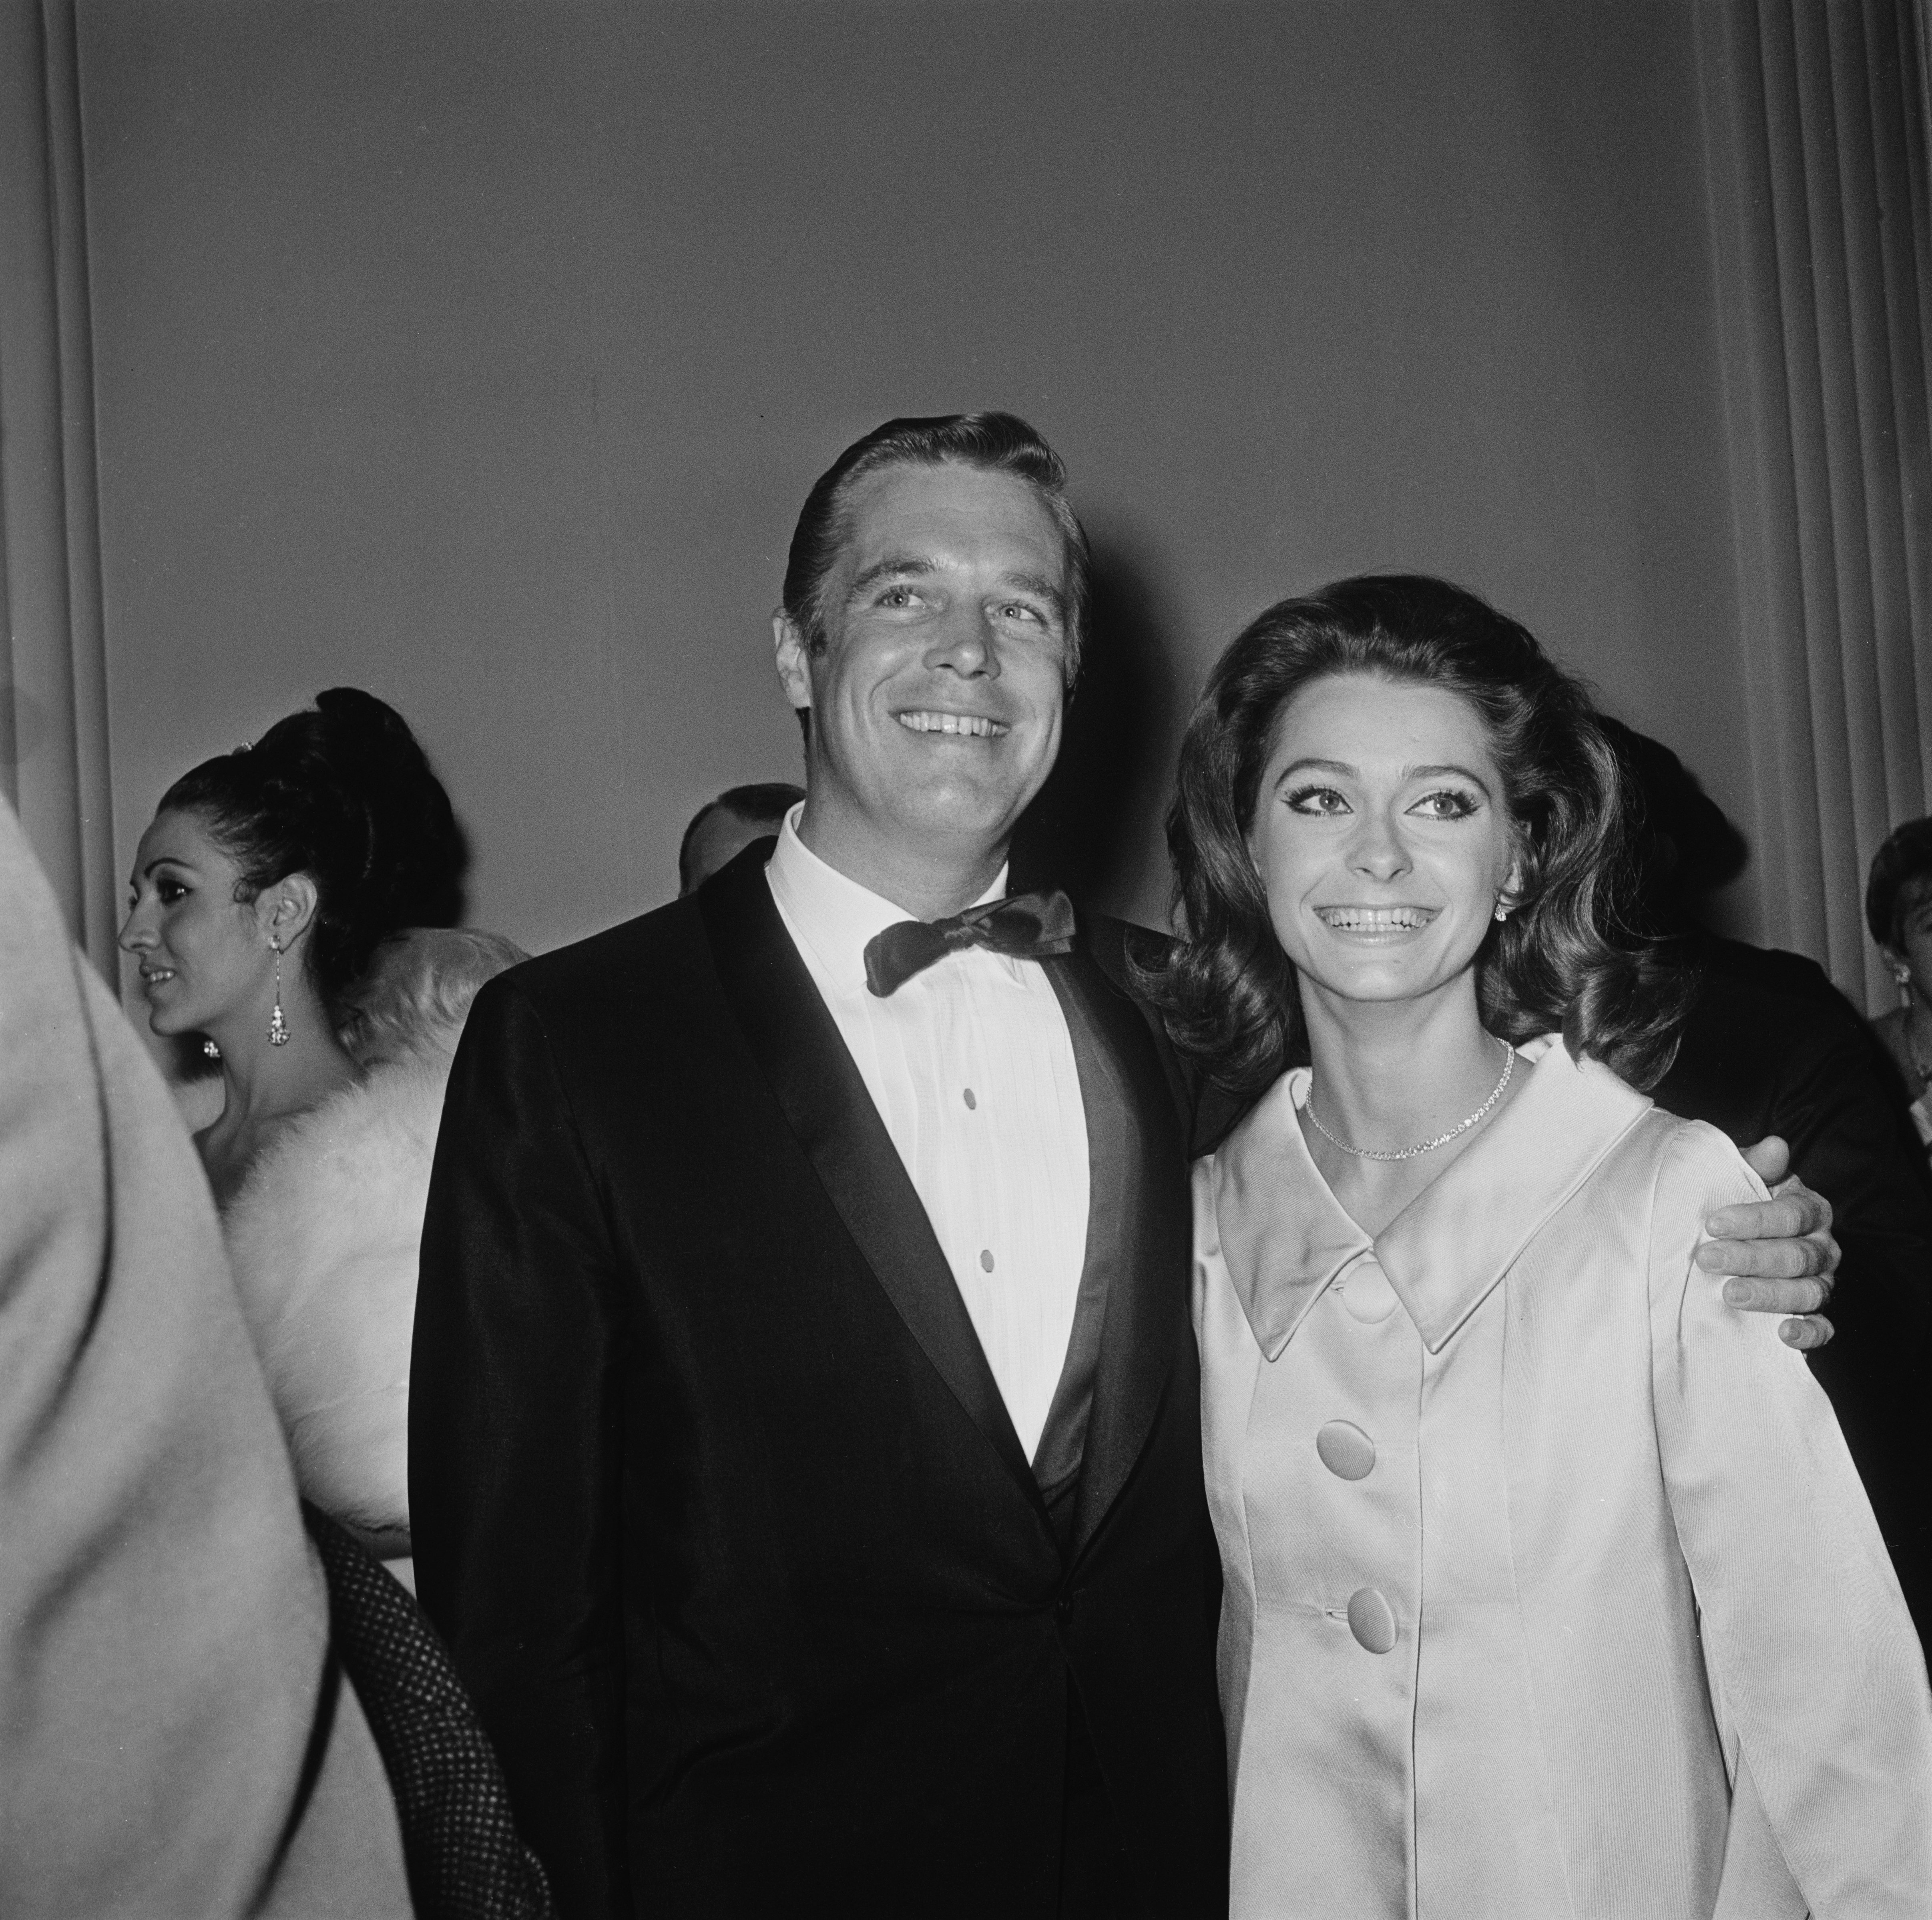 George Peppard and Elizabeth Ashley at the premiere of the film "The Sand Pebbles" in 1966 | Photo: Getty Images